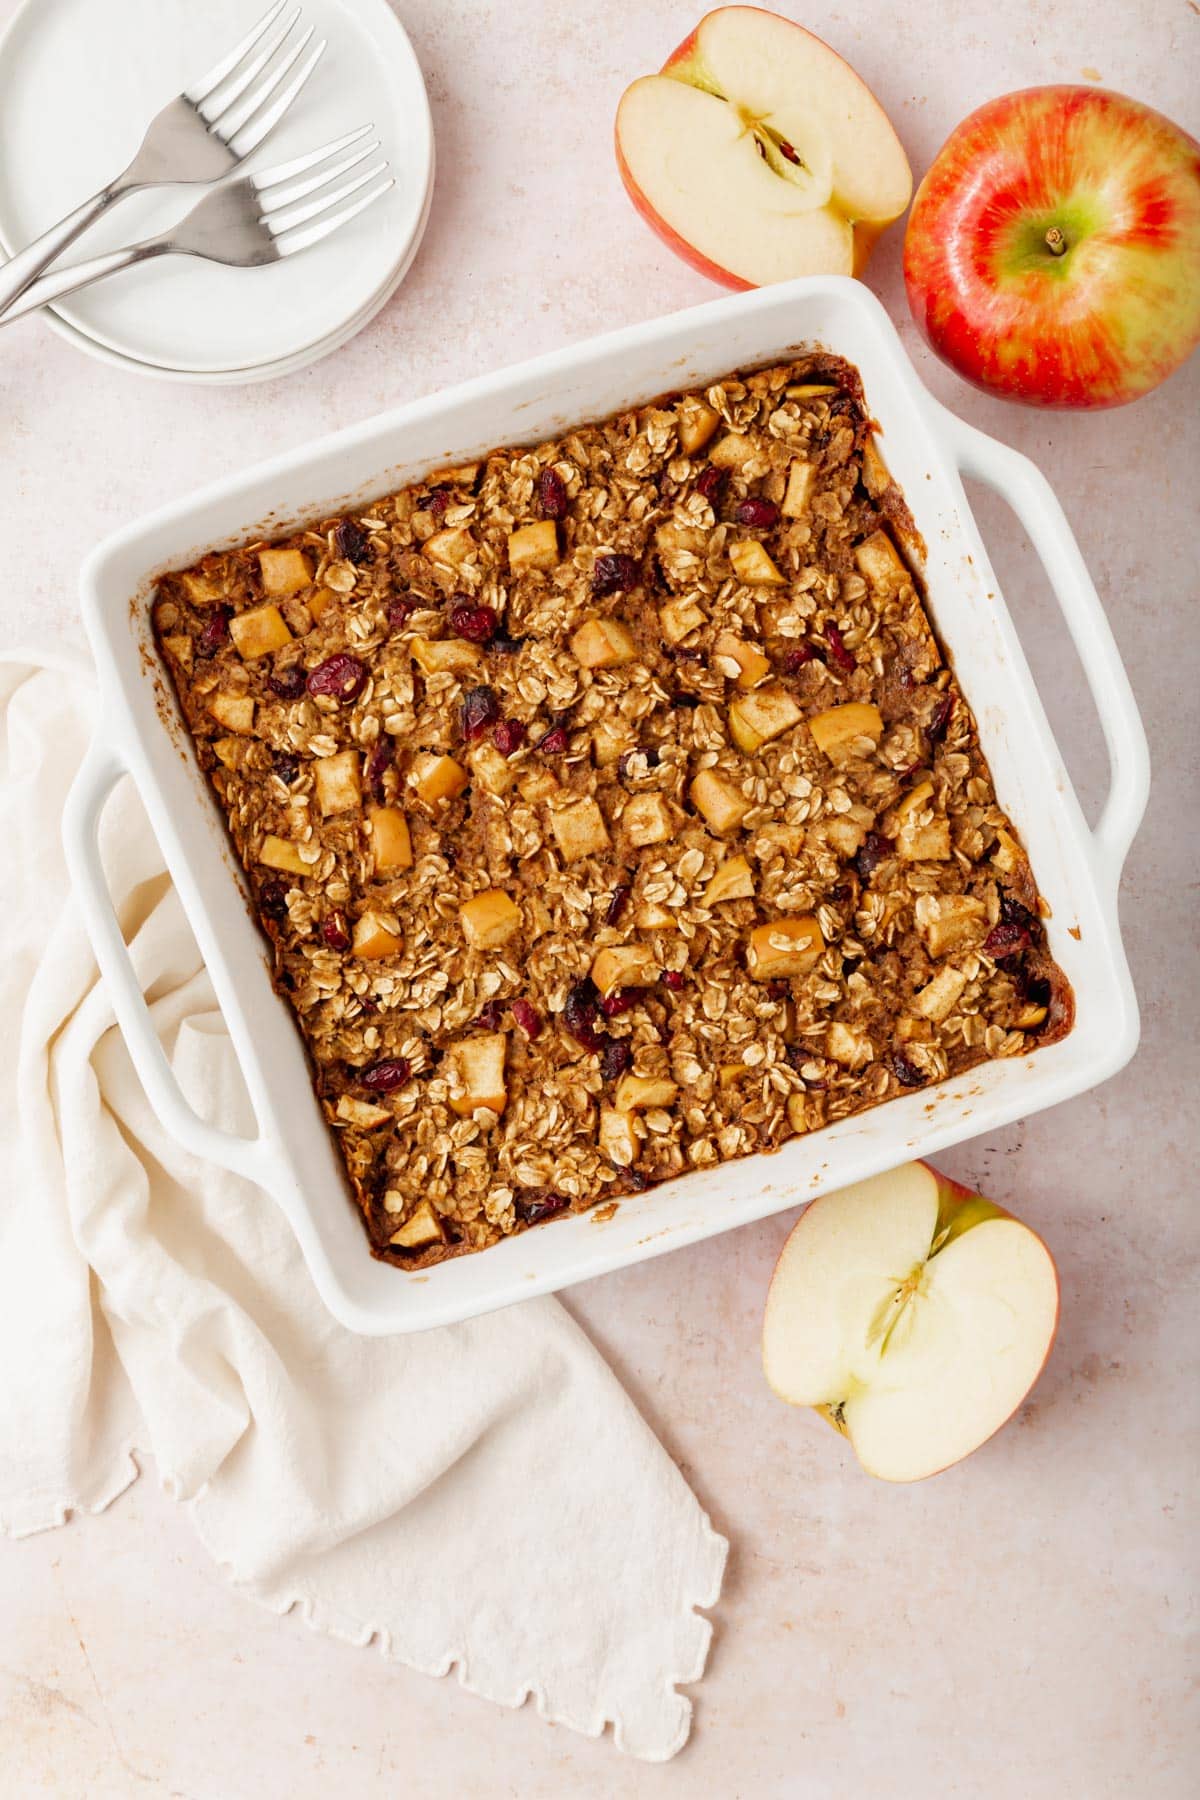 Gluten-free vegan apple baked oatmeal in a square baking dish with fresh apples surrounding the baking pan.